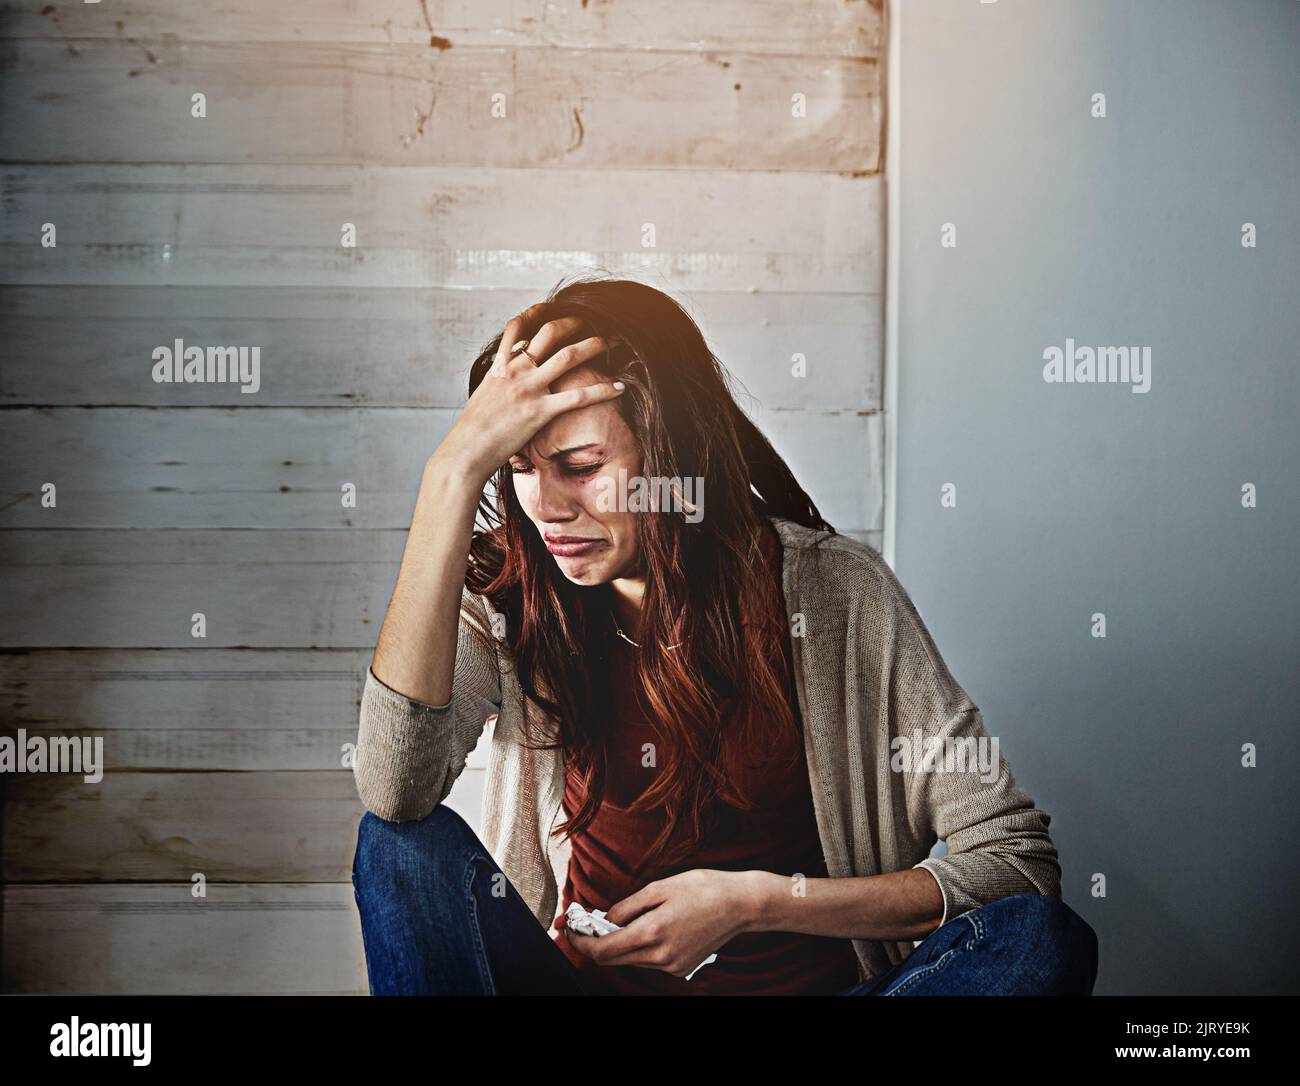 All she can do is cry. a beaten and bruised young woman crying. Stock Photo